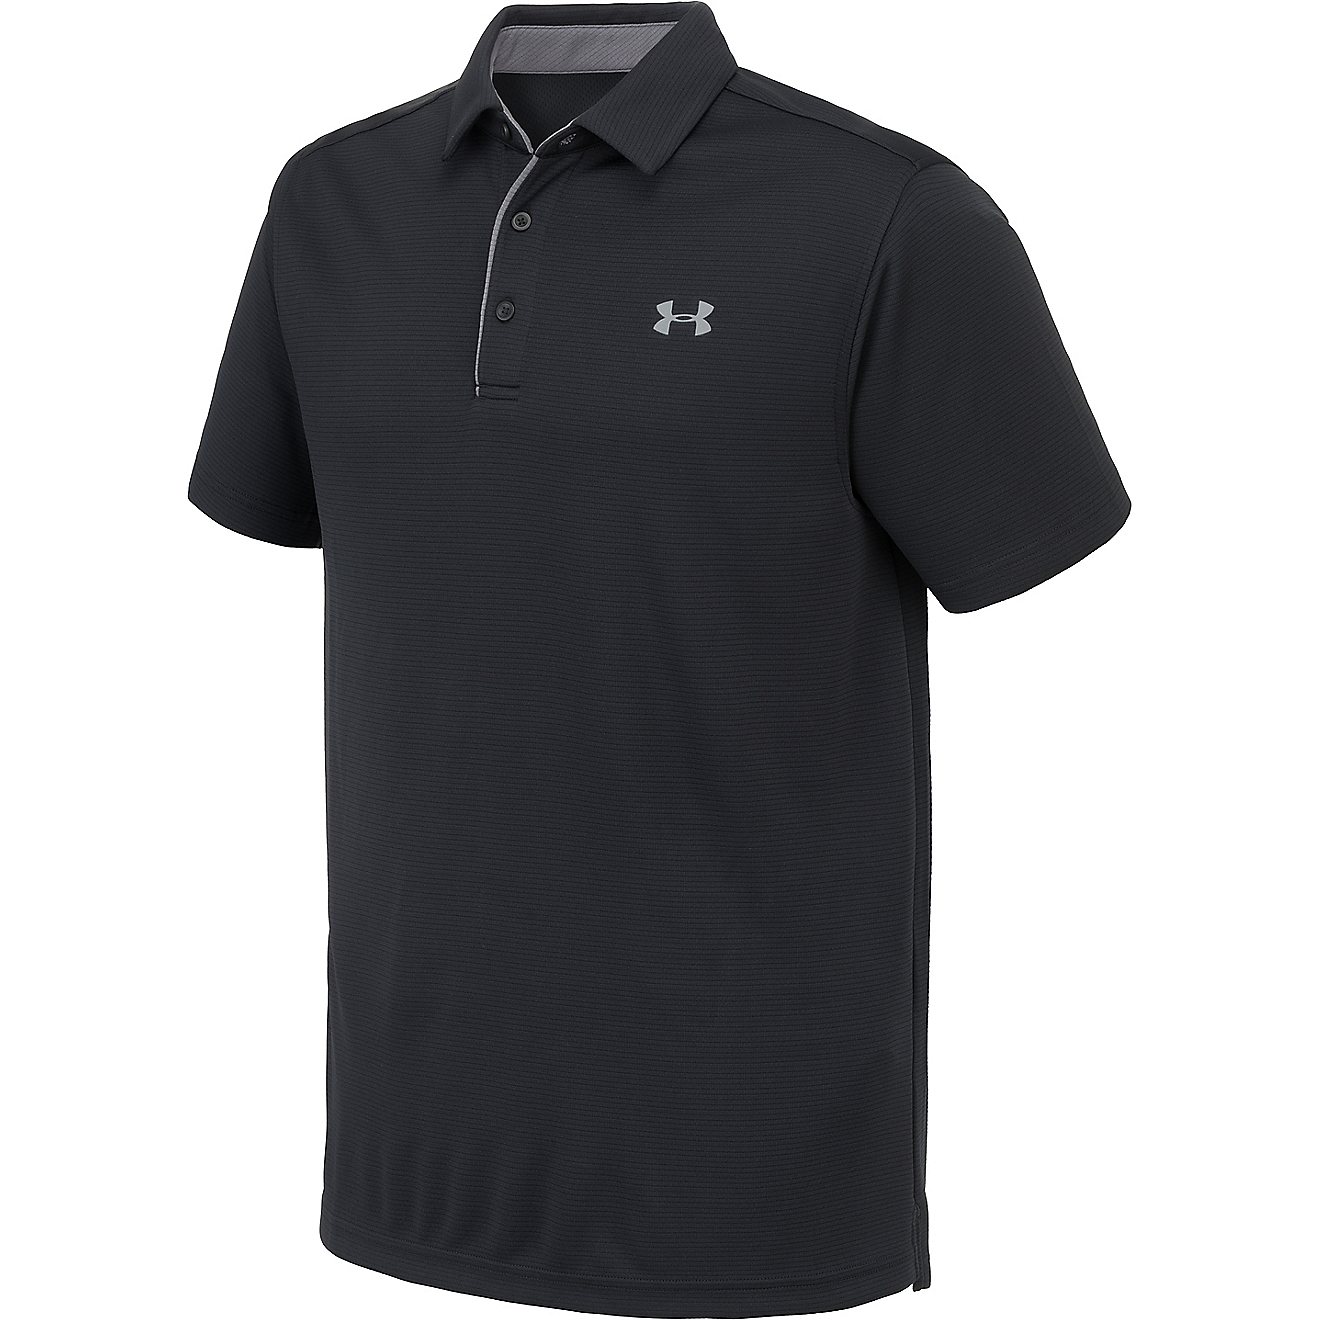 Under Armor Mens Outdoor Box Graphic T-Shirt 